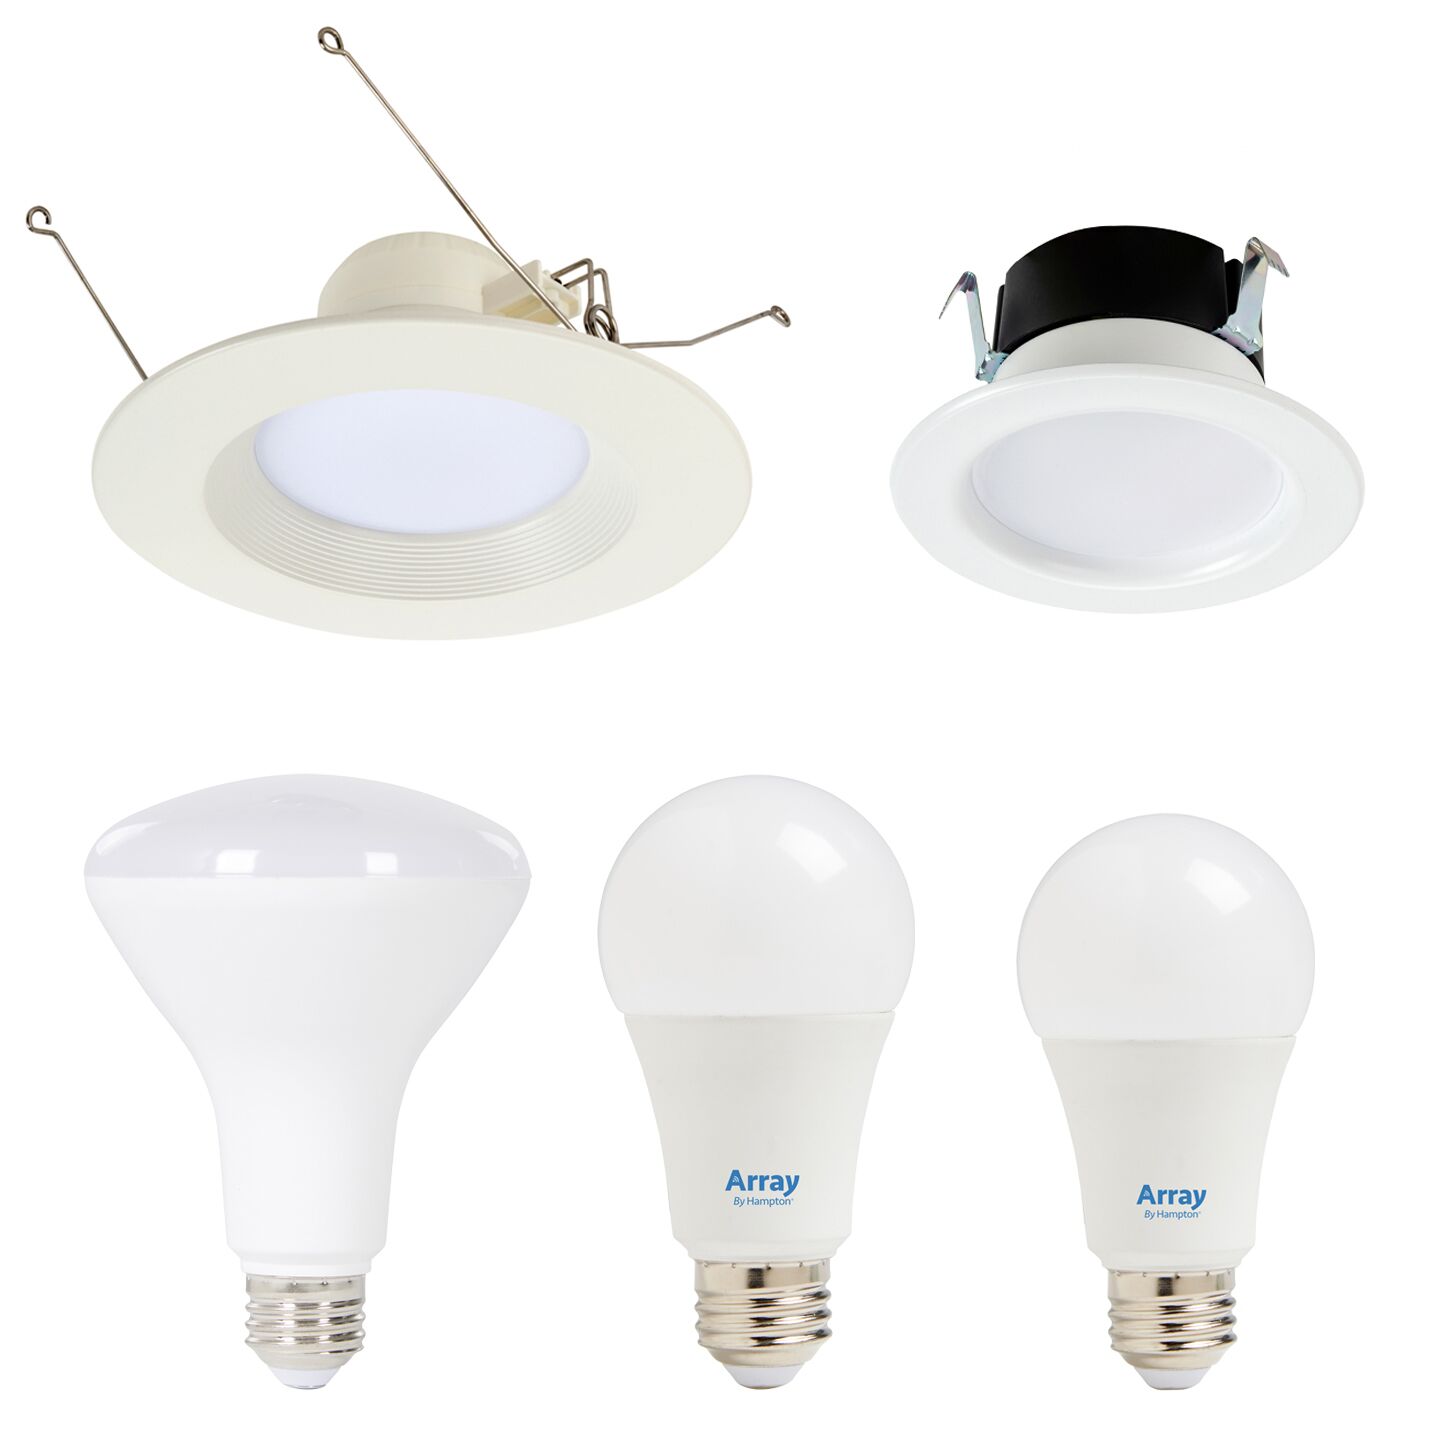 Various light bulb sizes on display under recessed light fixtures